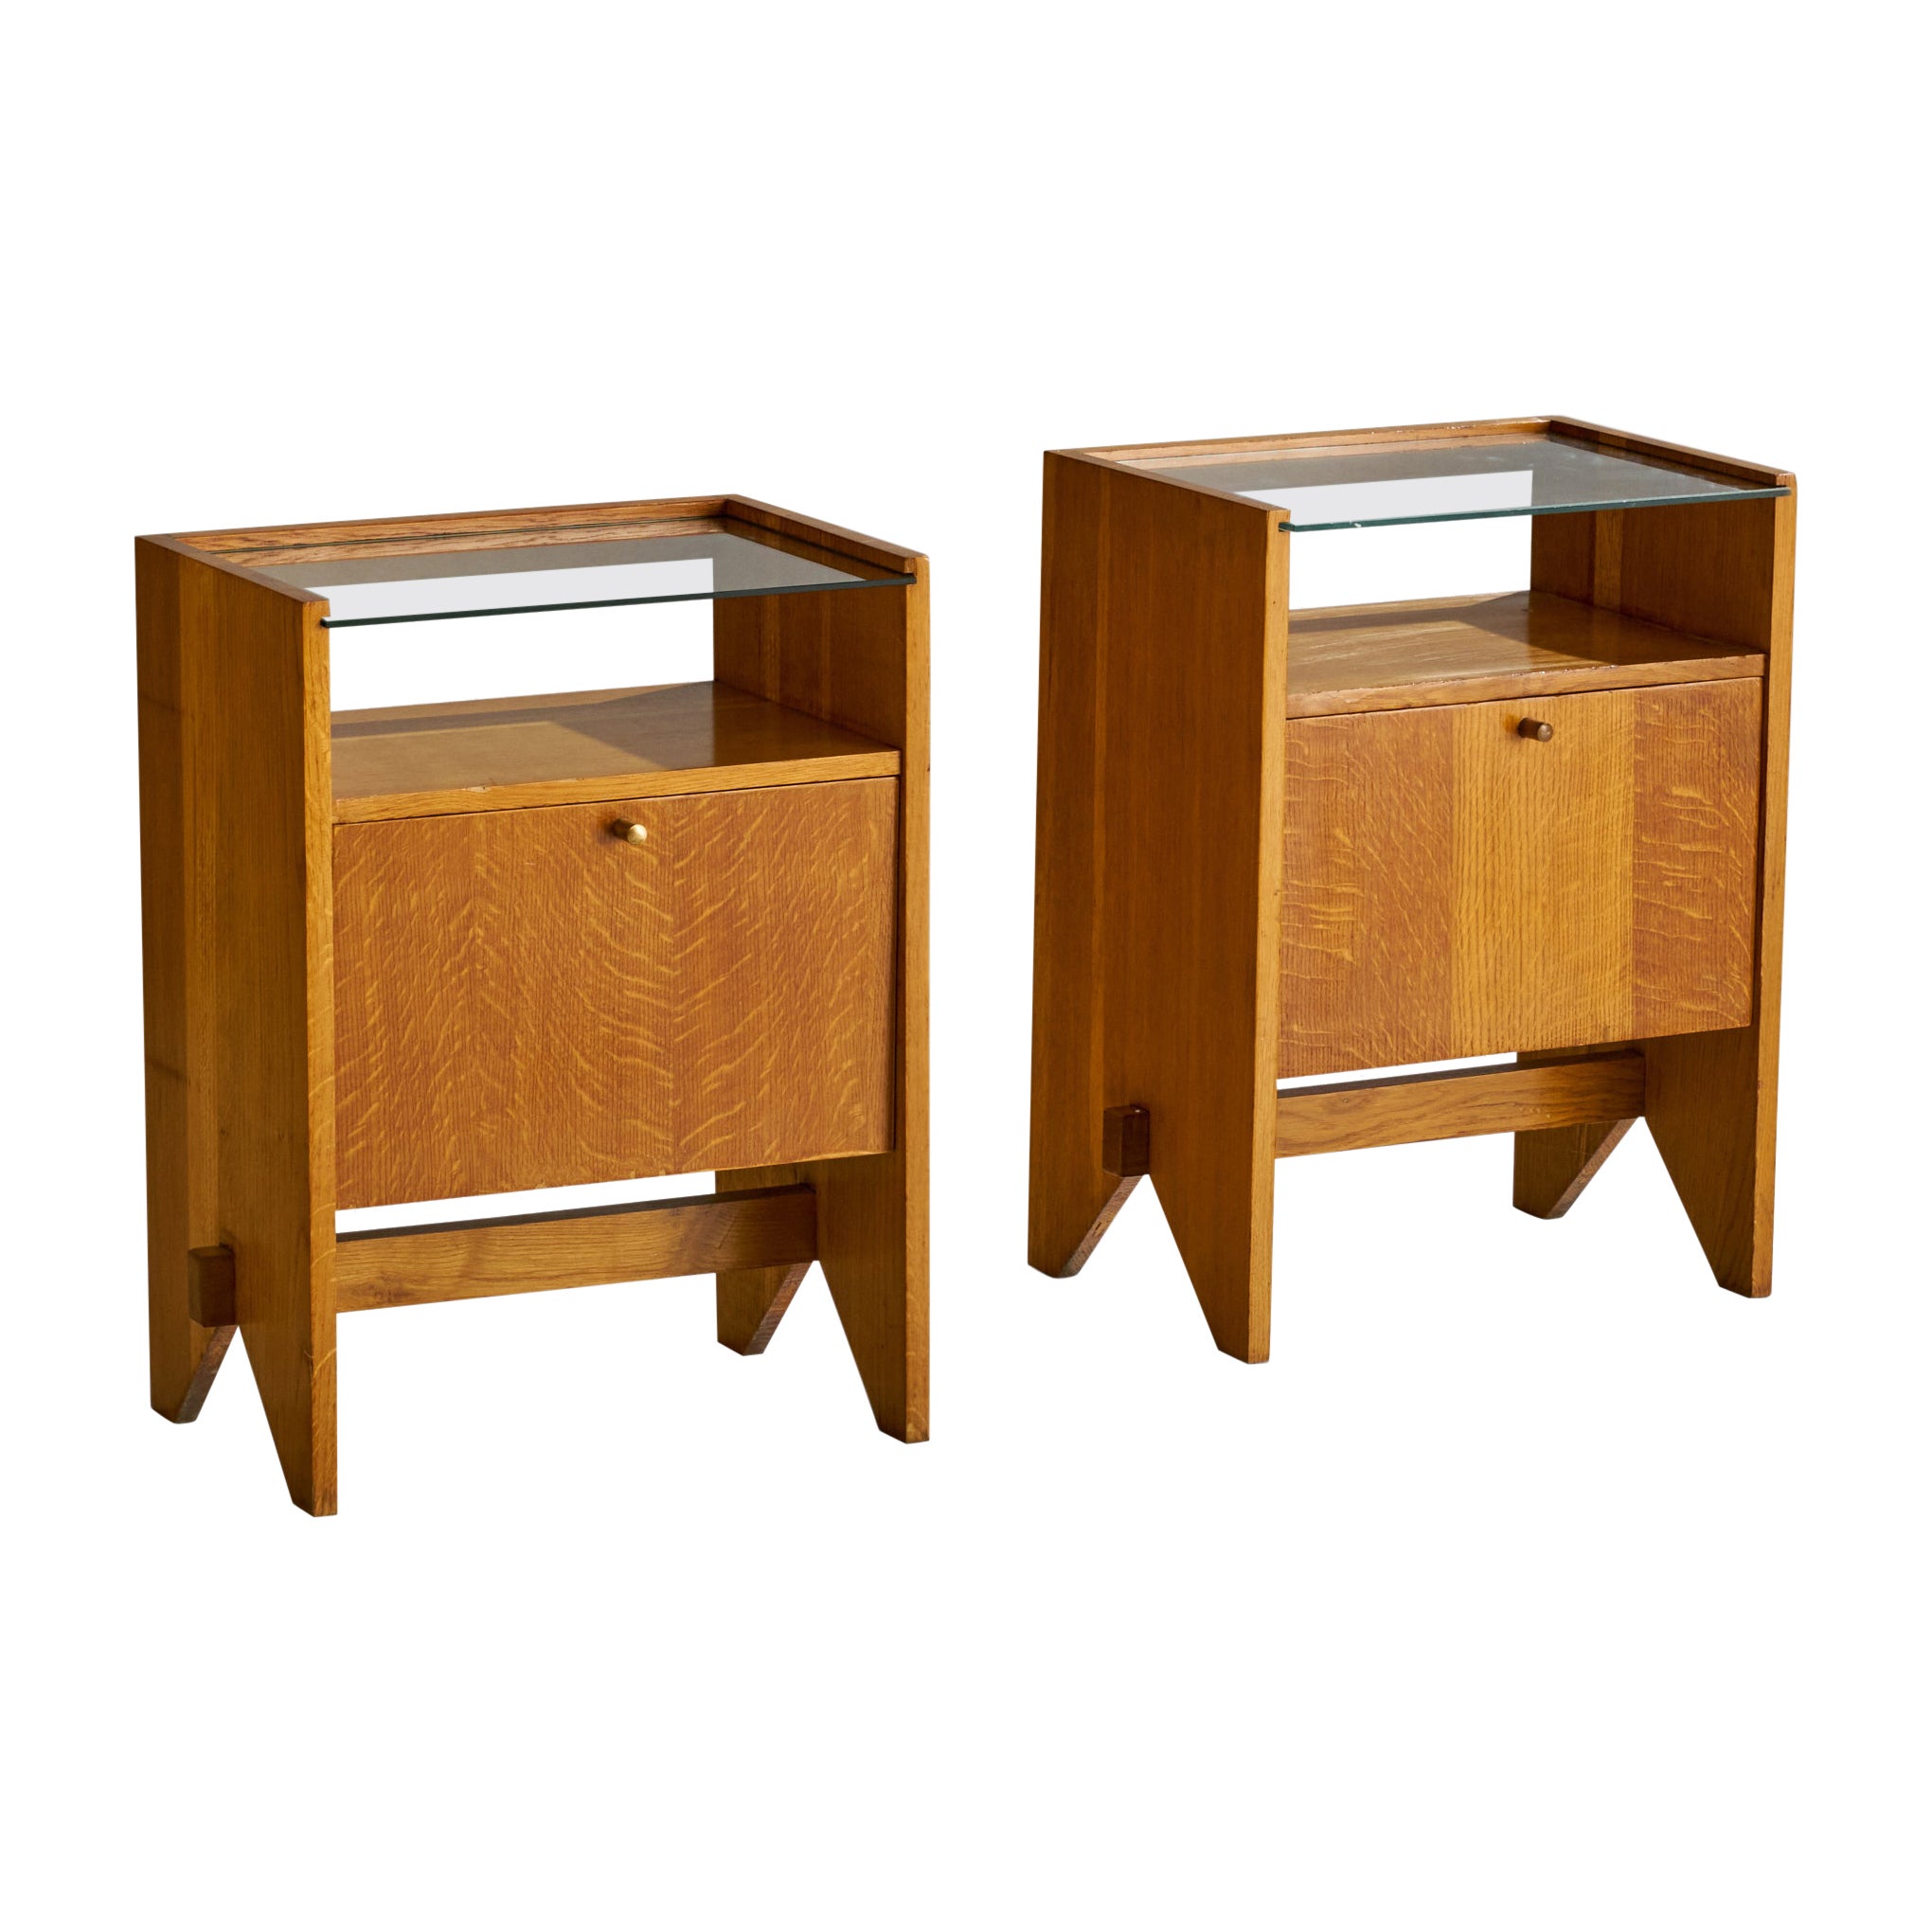 *PREVIEW* ISA Bergamo, Nightstands, Wood, Glass, Brass, Italy, 1950s For Sale